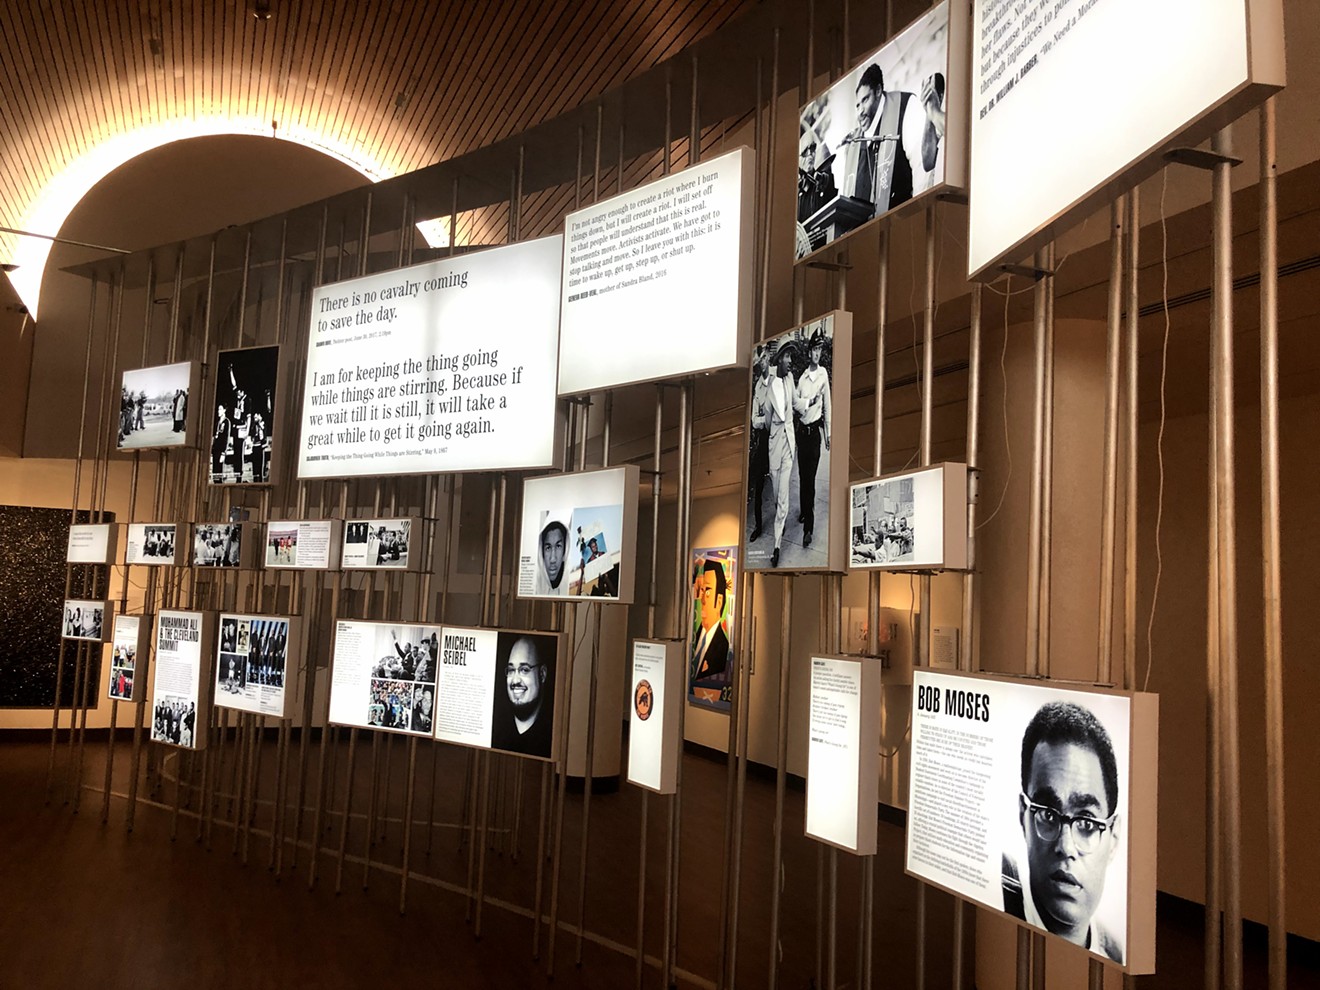 A new art and history exhibit from the Smithsonian Institute called Men of Change that celebrates African American men is now open at the African American Museum of Dallas in Fair Park.